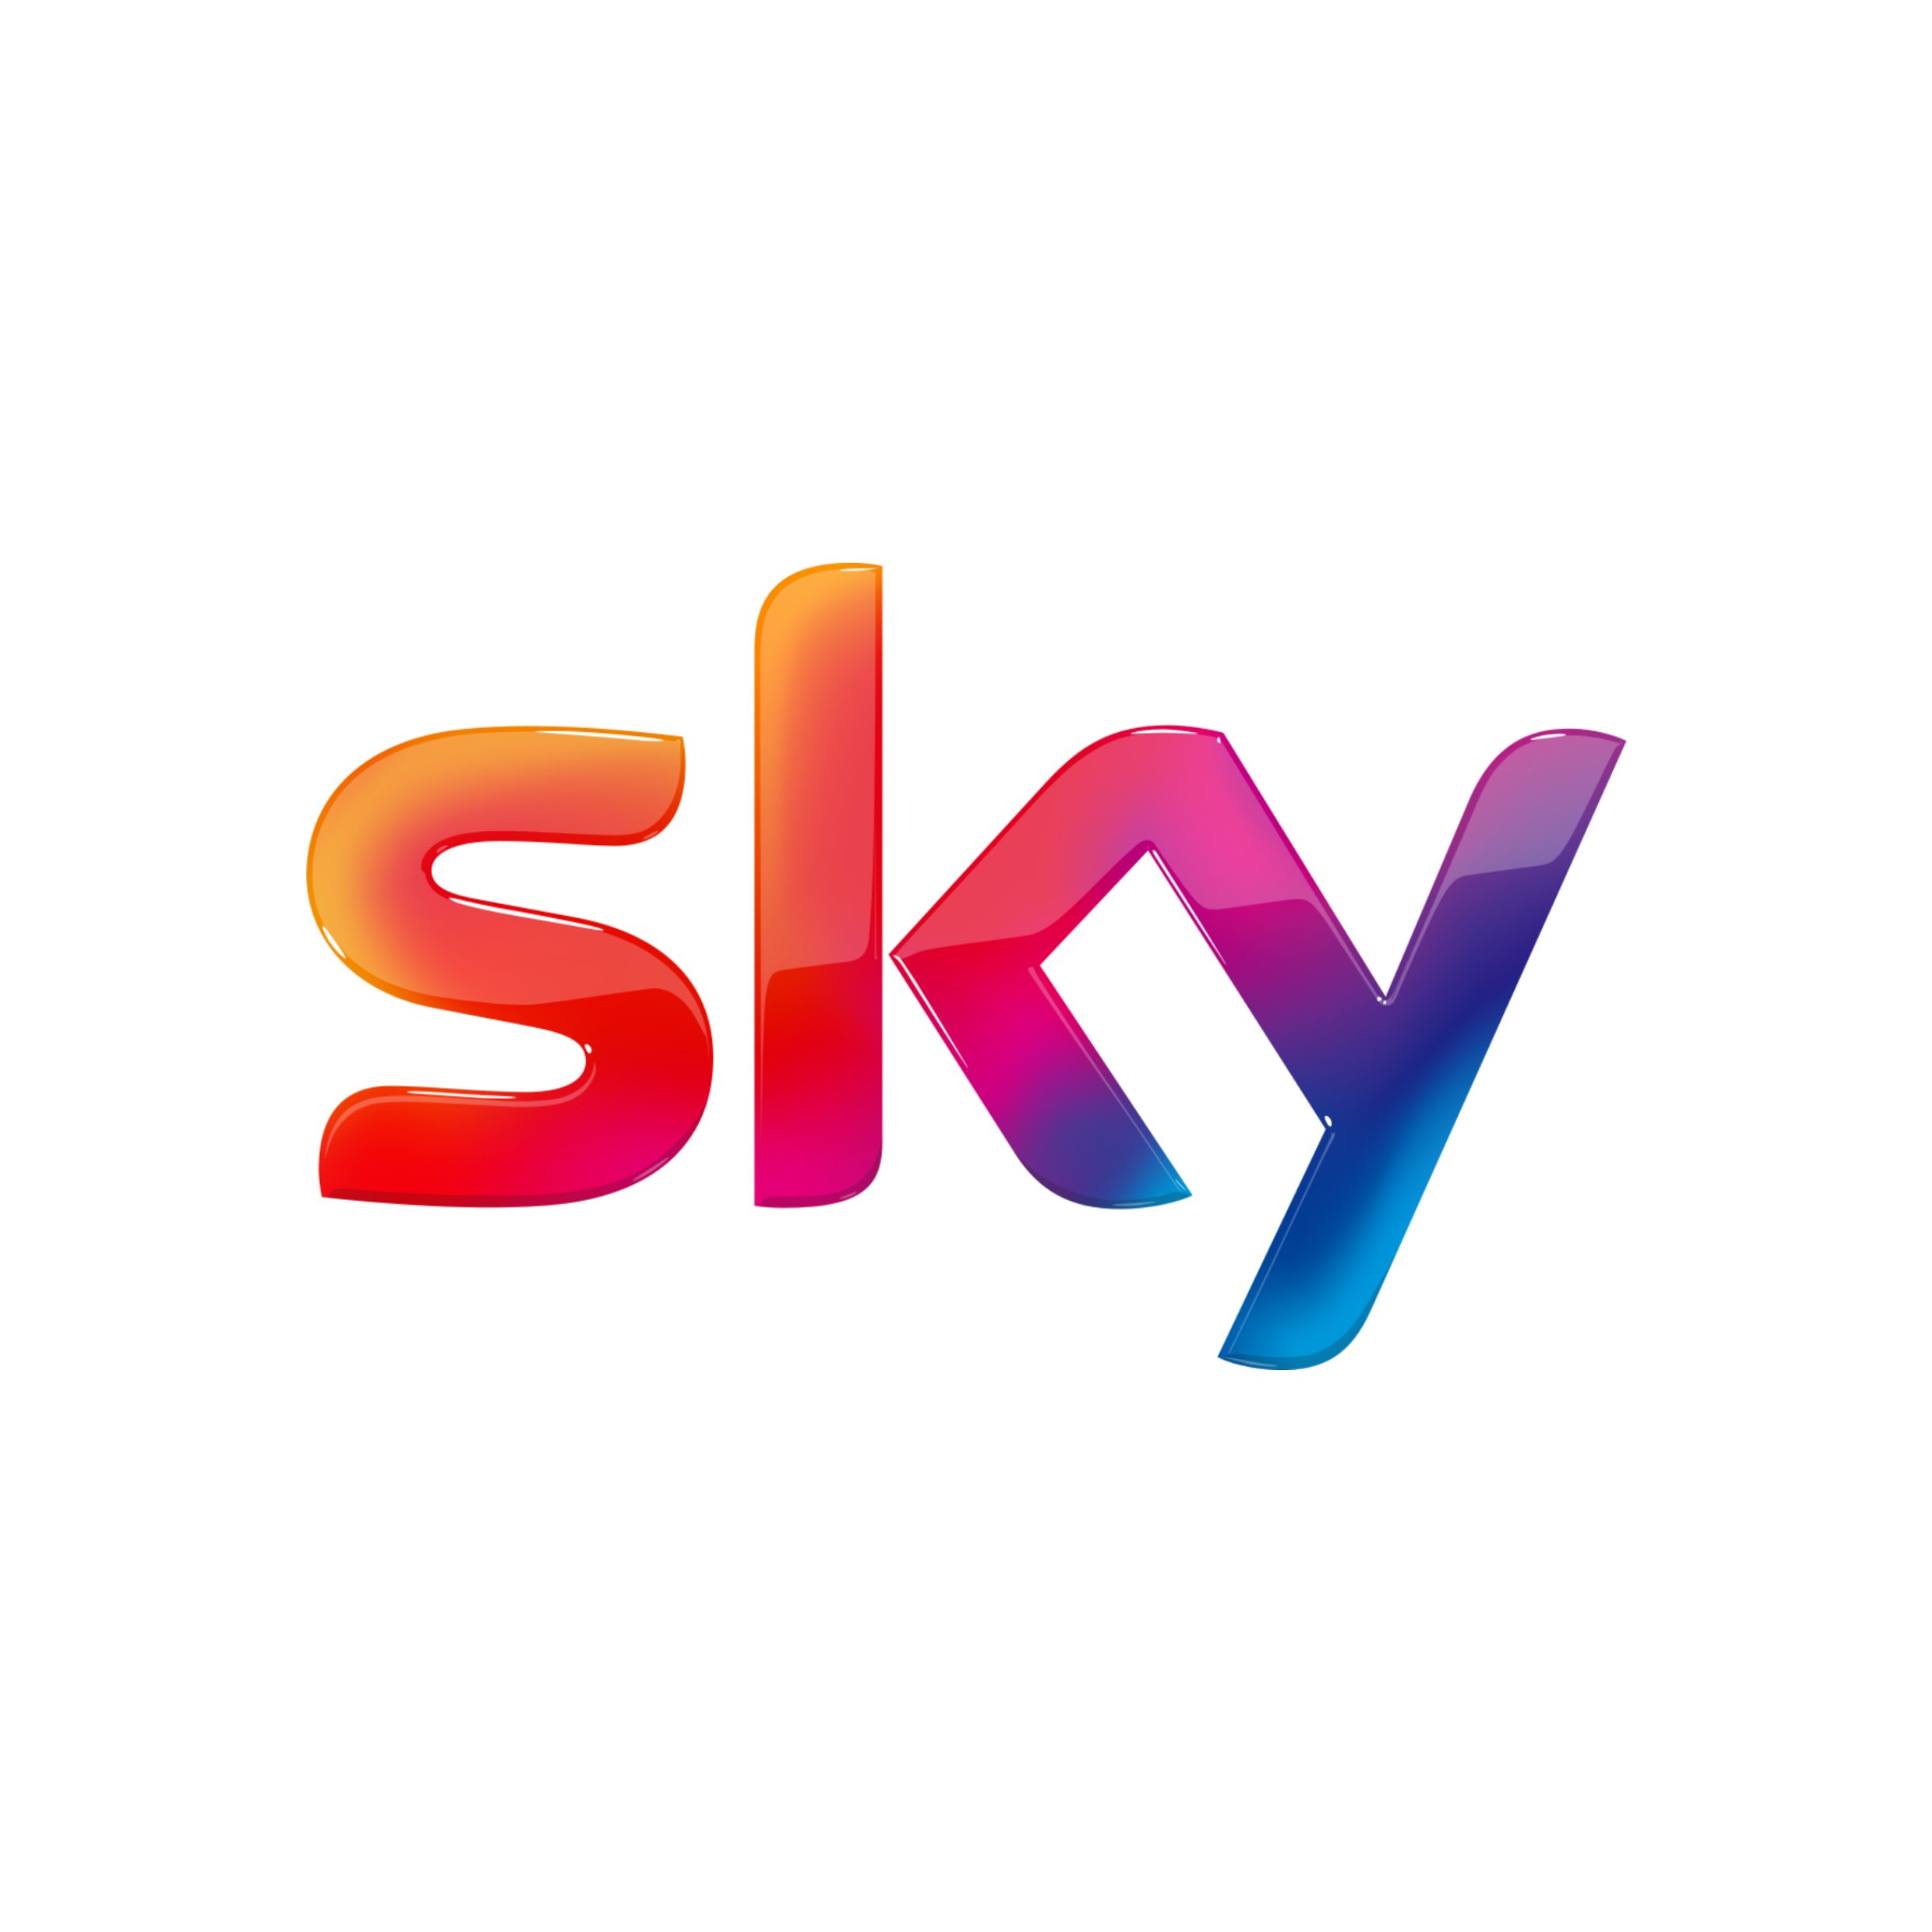 Sky launches new service that allows you to watch Sky TV without a satellite dish - here’s how it compares